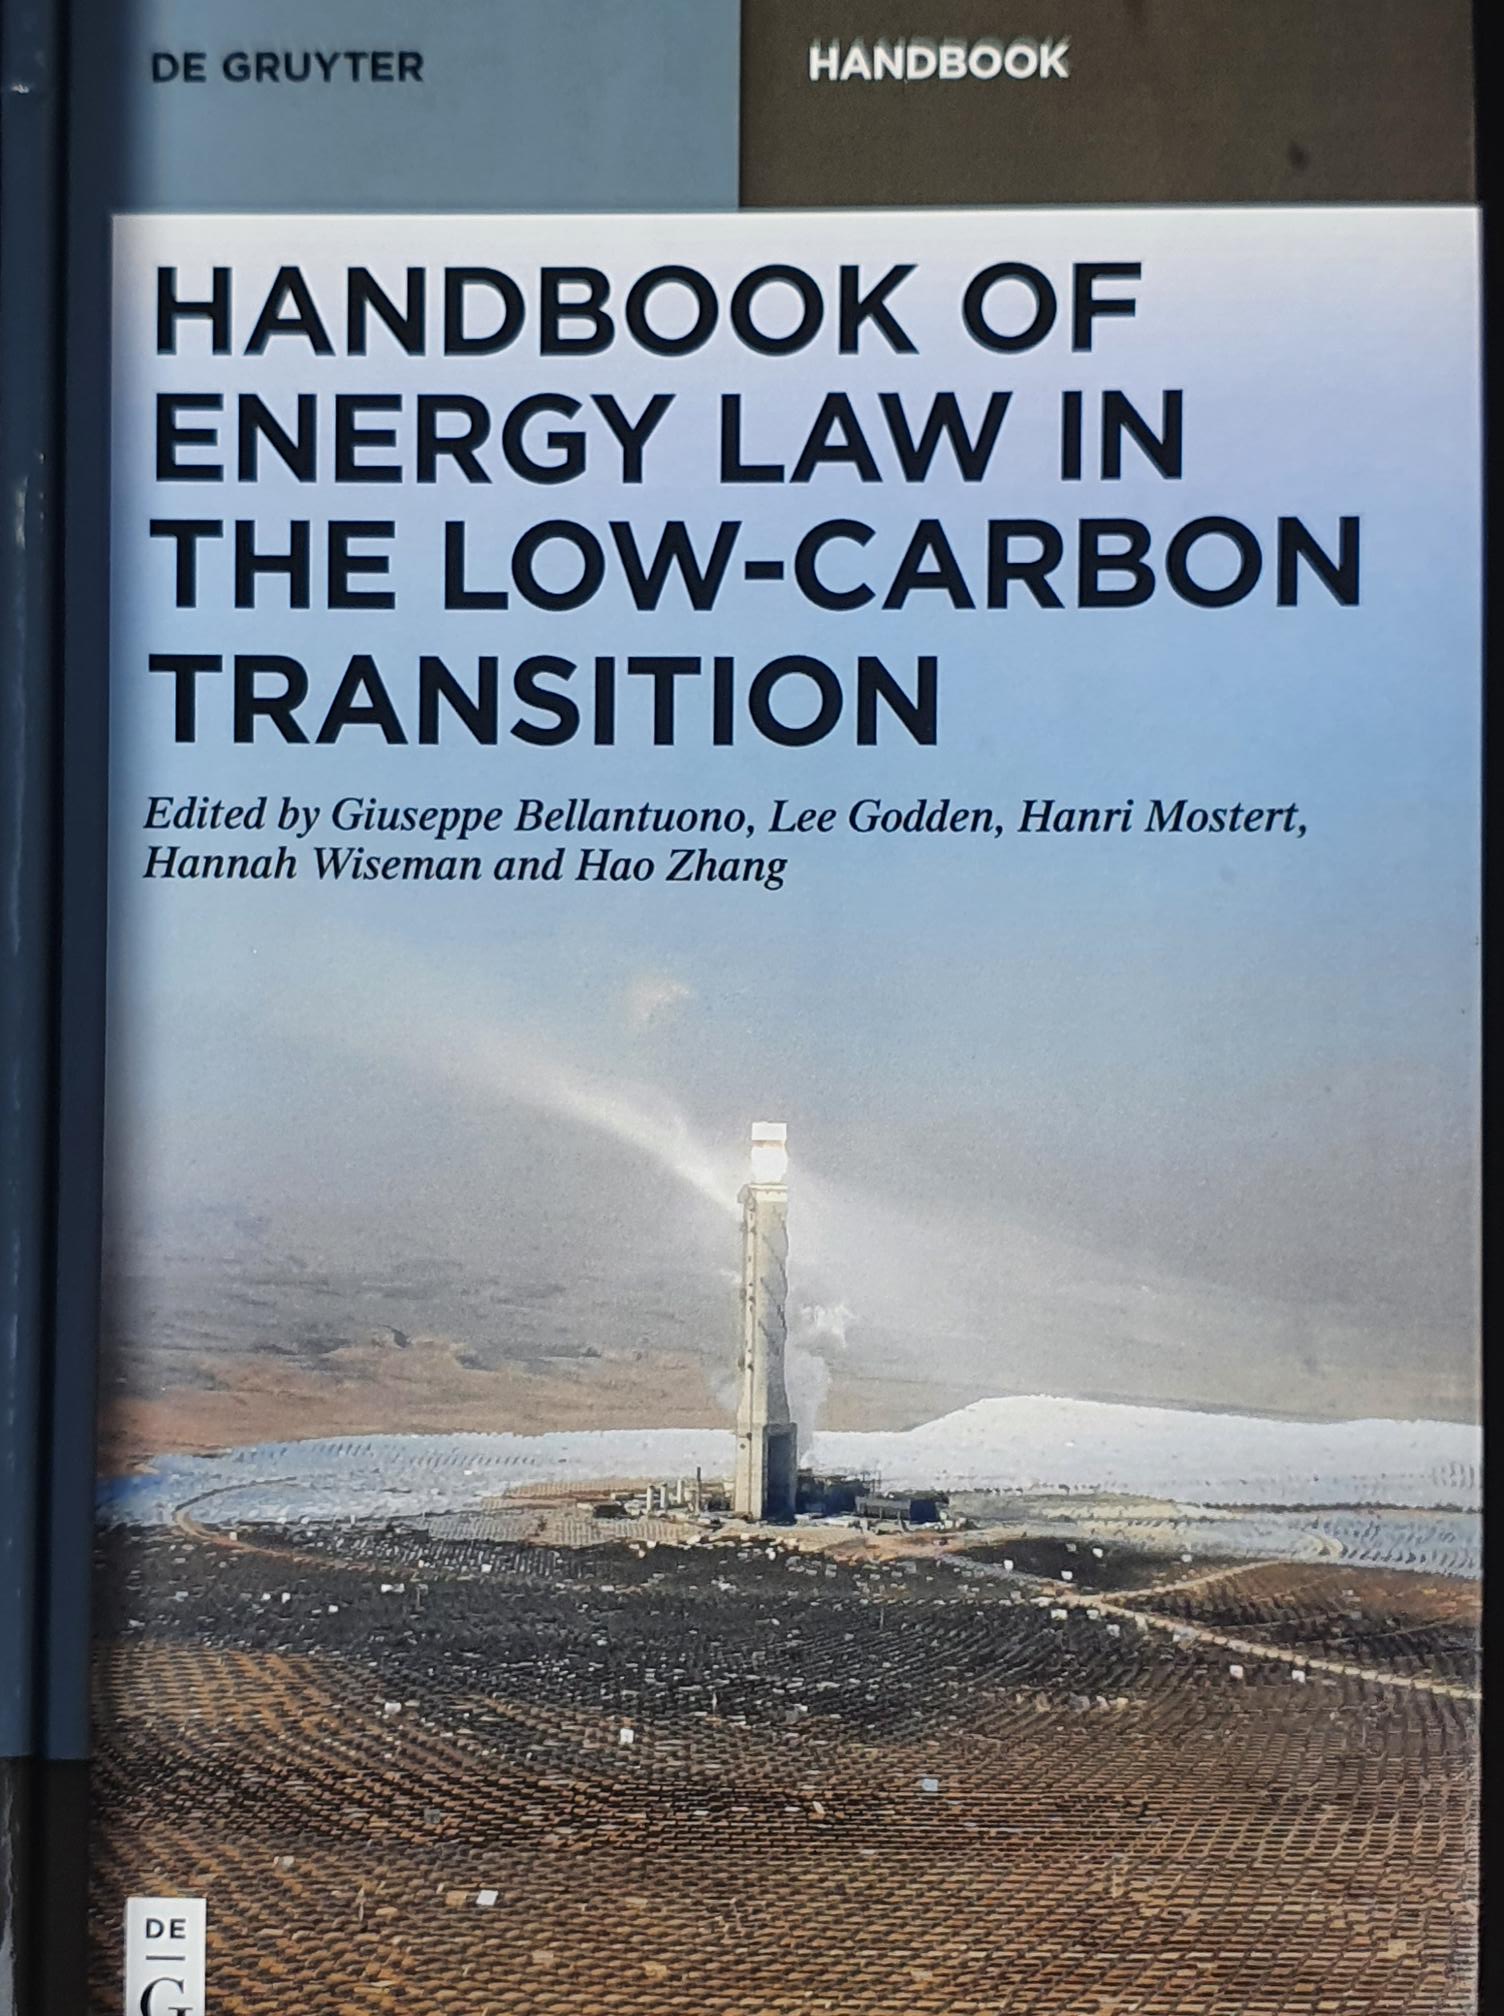 "Handbook of Energy Law in the Low- Carbon Transition"